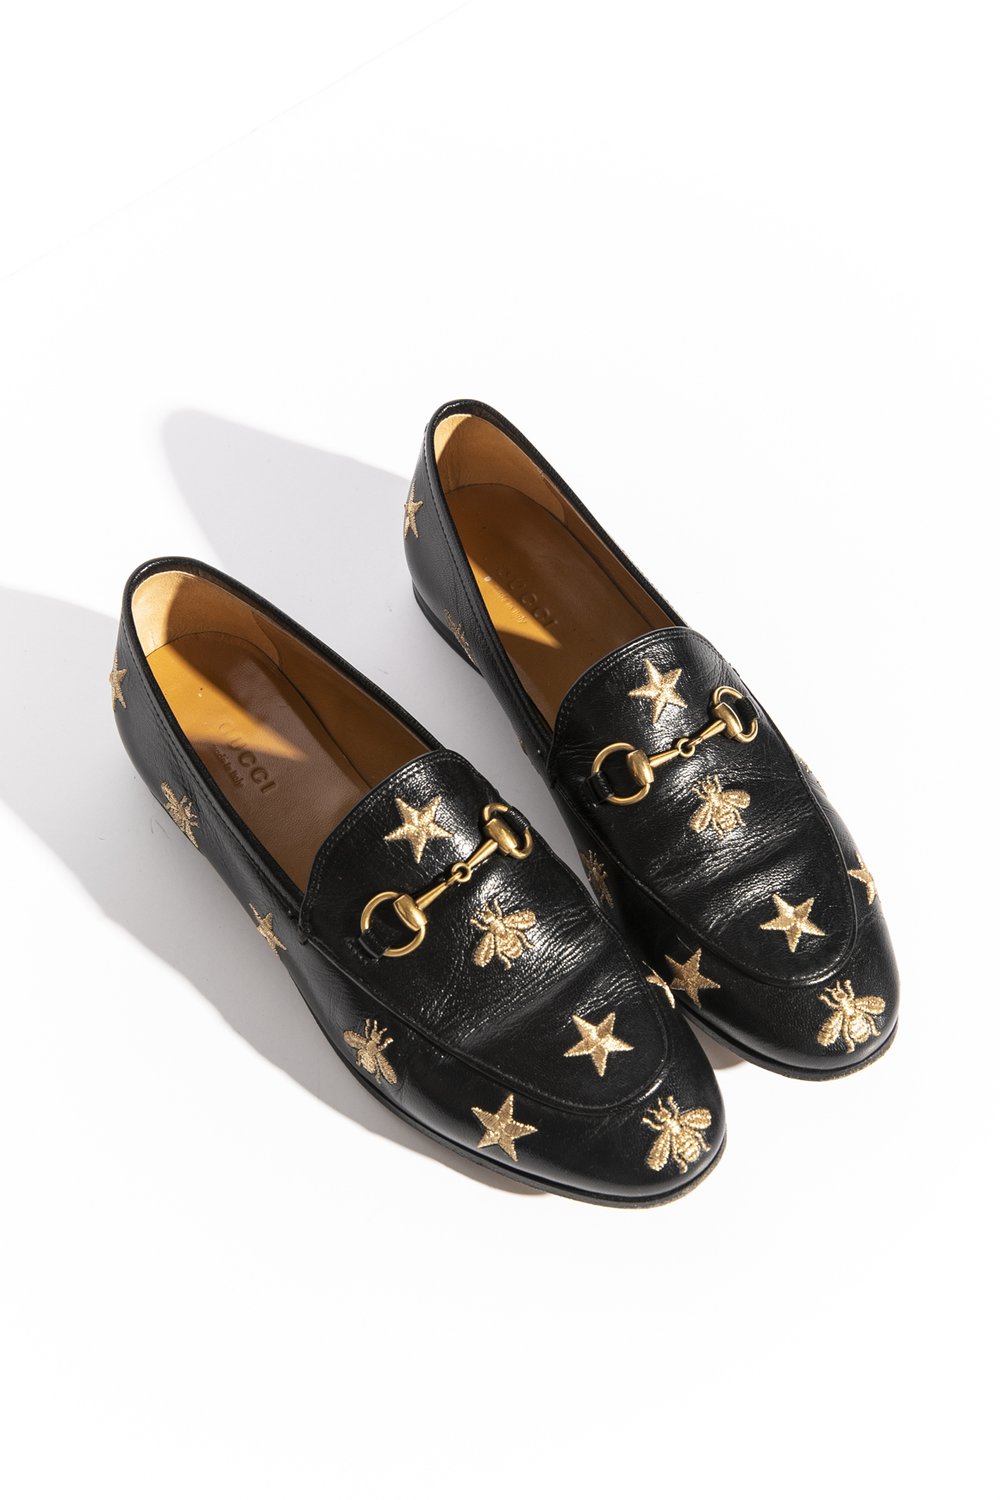 GUCCI Black & Embroidered Loafers (Sz. 37) — MOSS Consignment